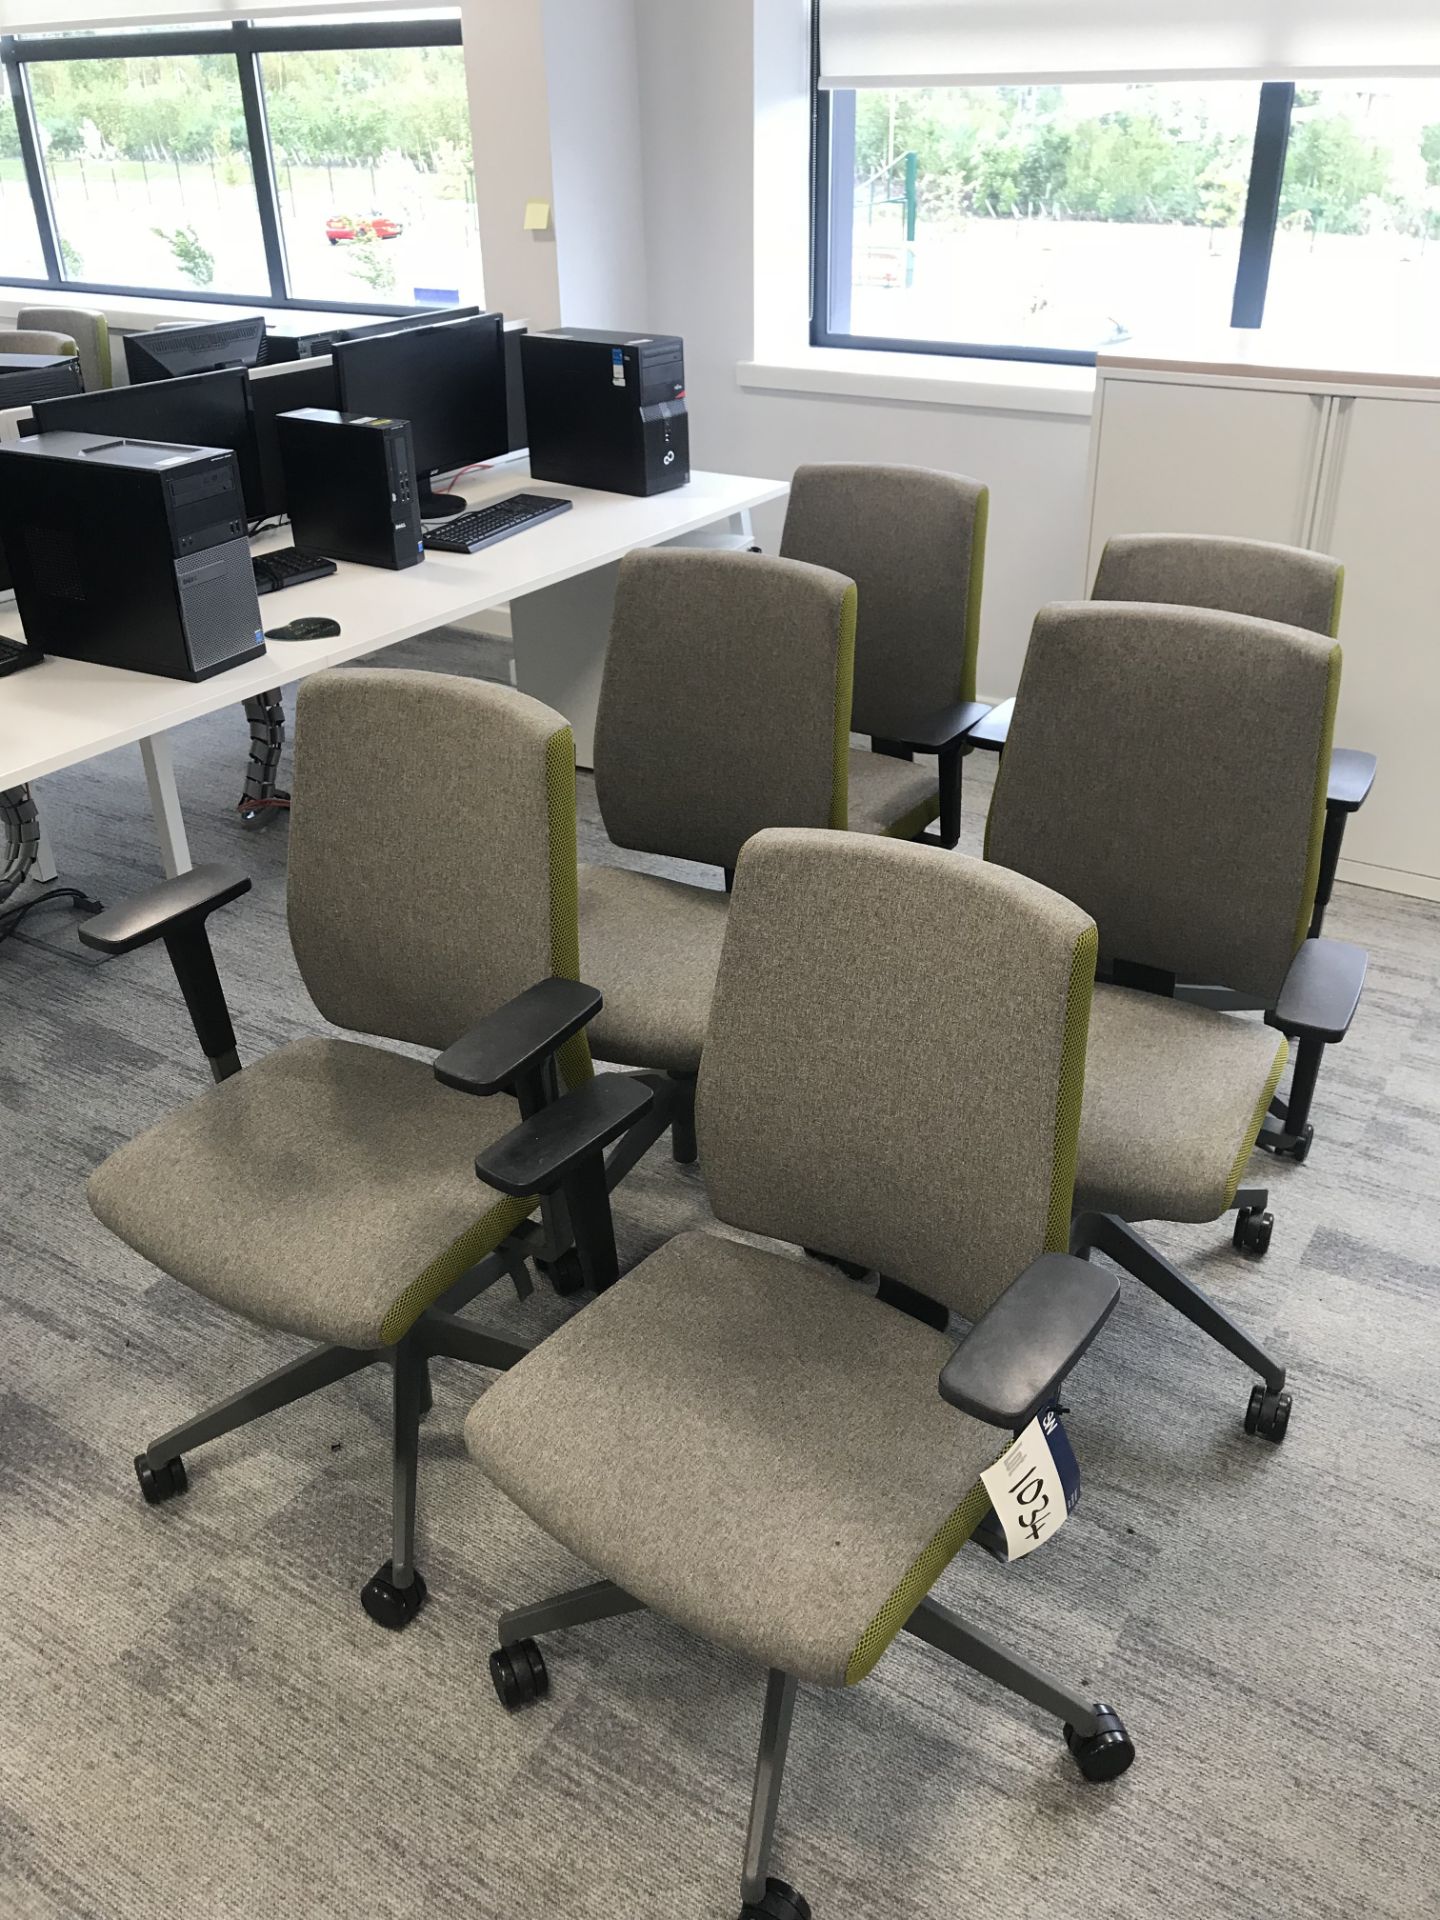 6 x Grey and Green Upholstered Typists Chairs